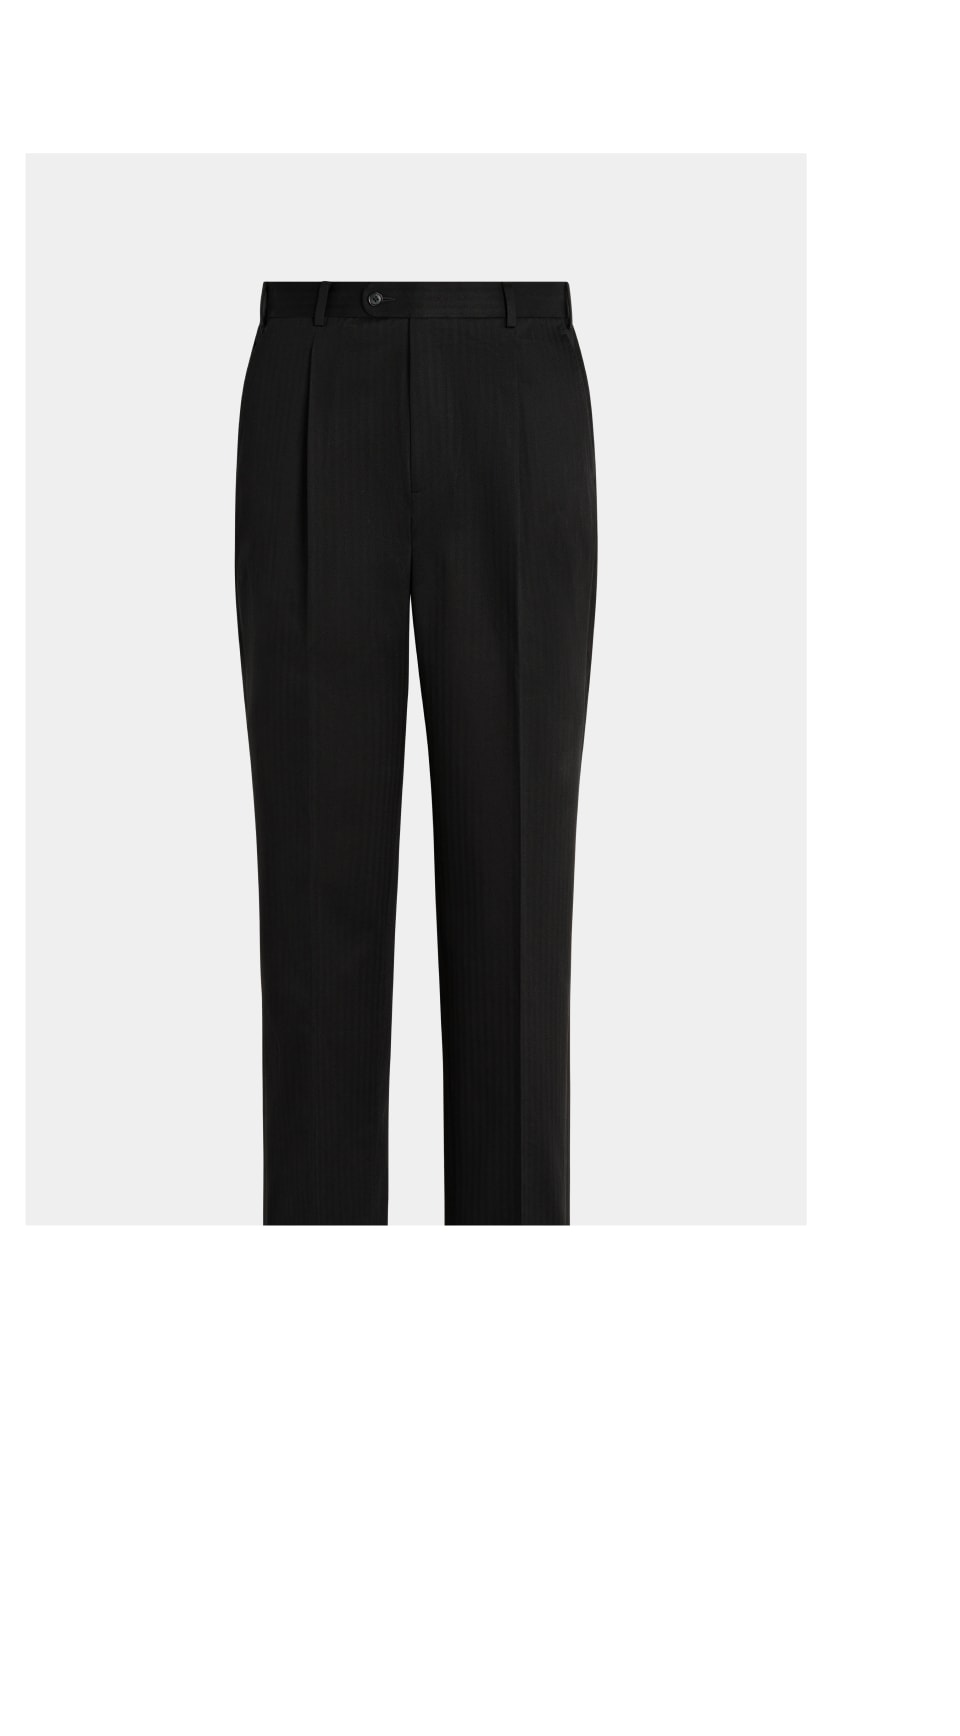 Shop the trousers